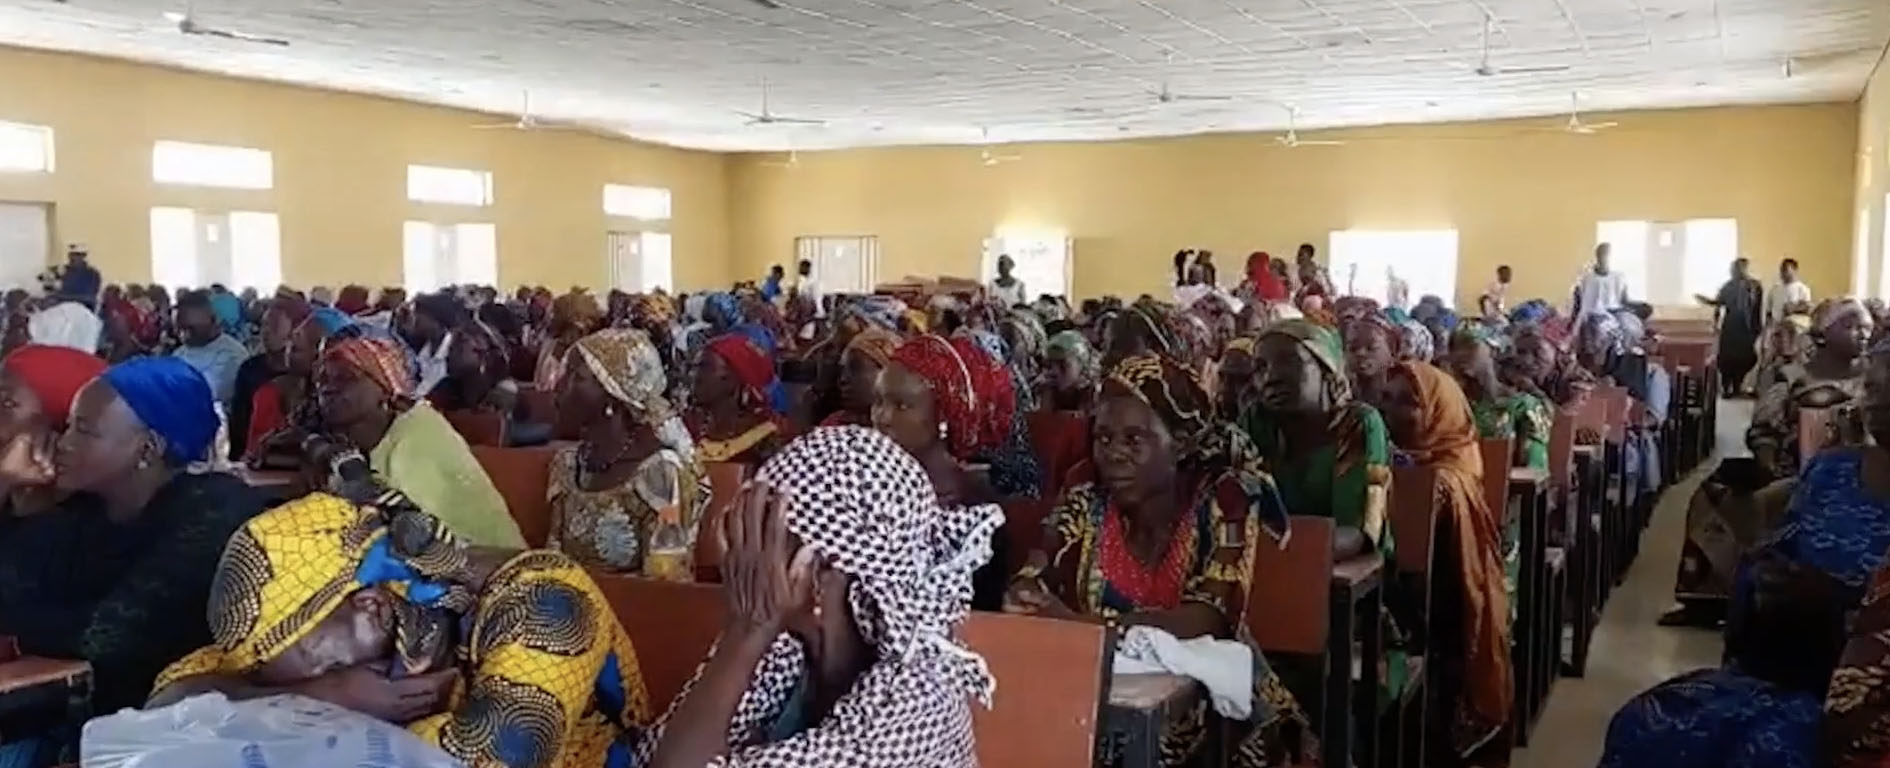 Parents of Kidnapped Nigerian Schoolgirls Gather for 10th Anniversary Service